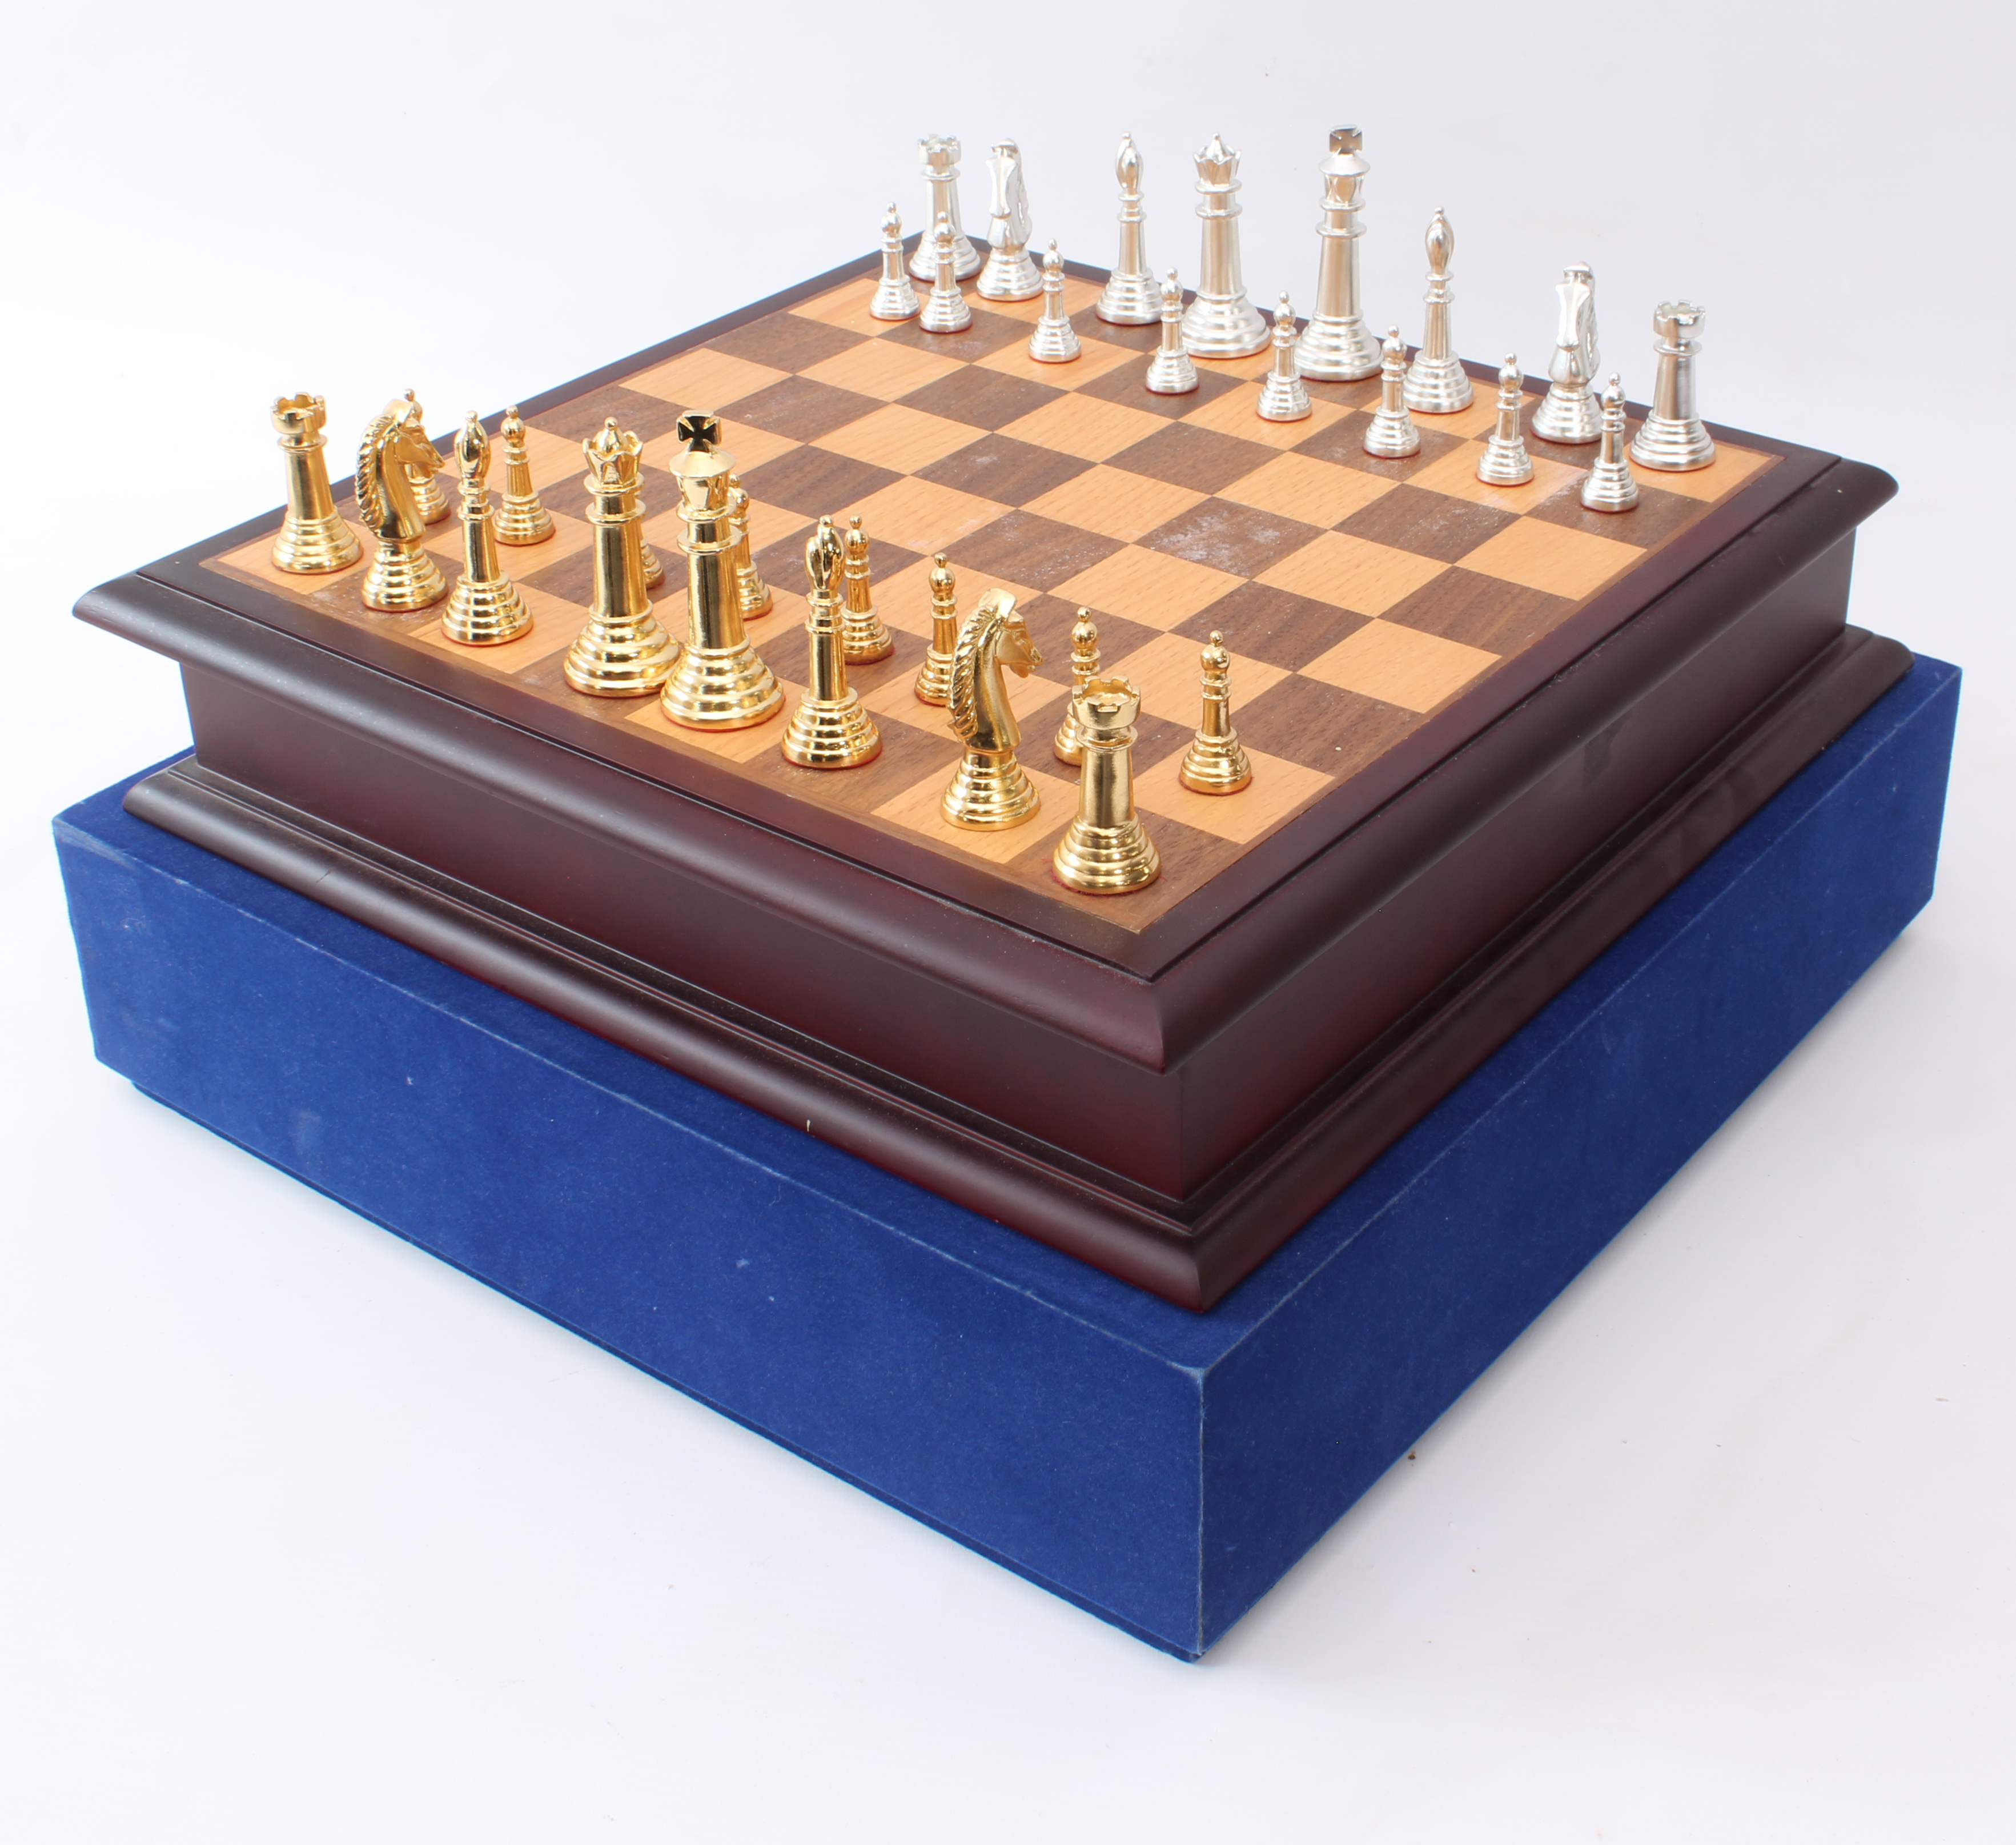 A cased chess set and board - late 20th century, the silver-coloured and gold-coloured cast metal